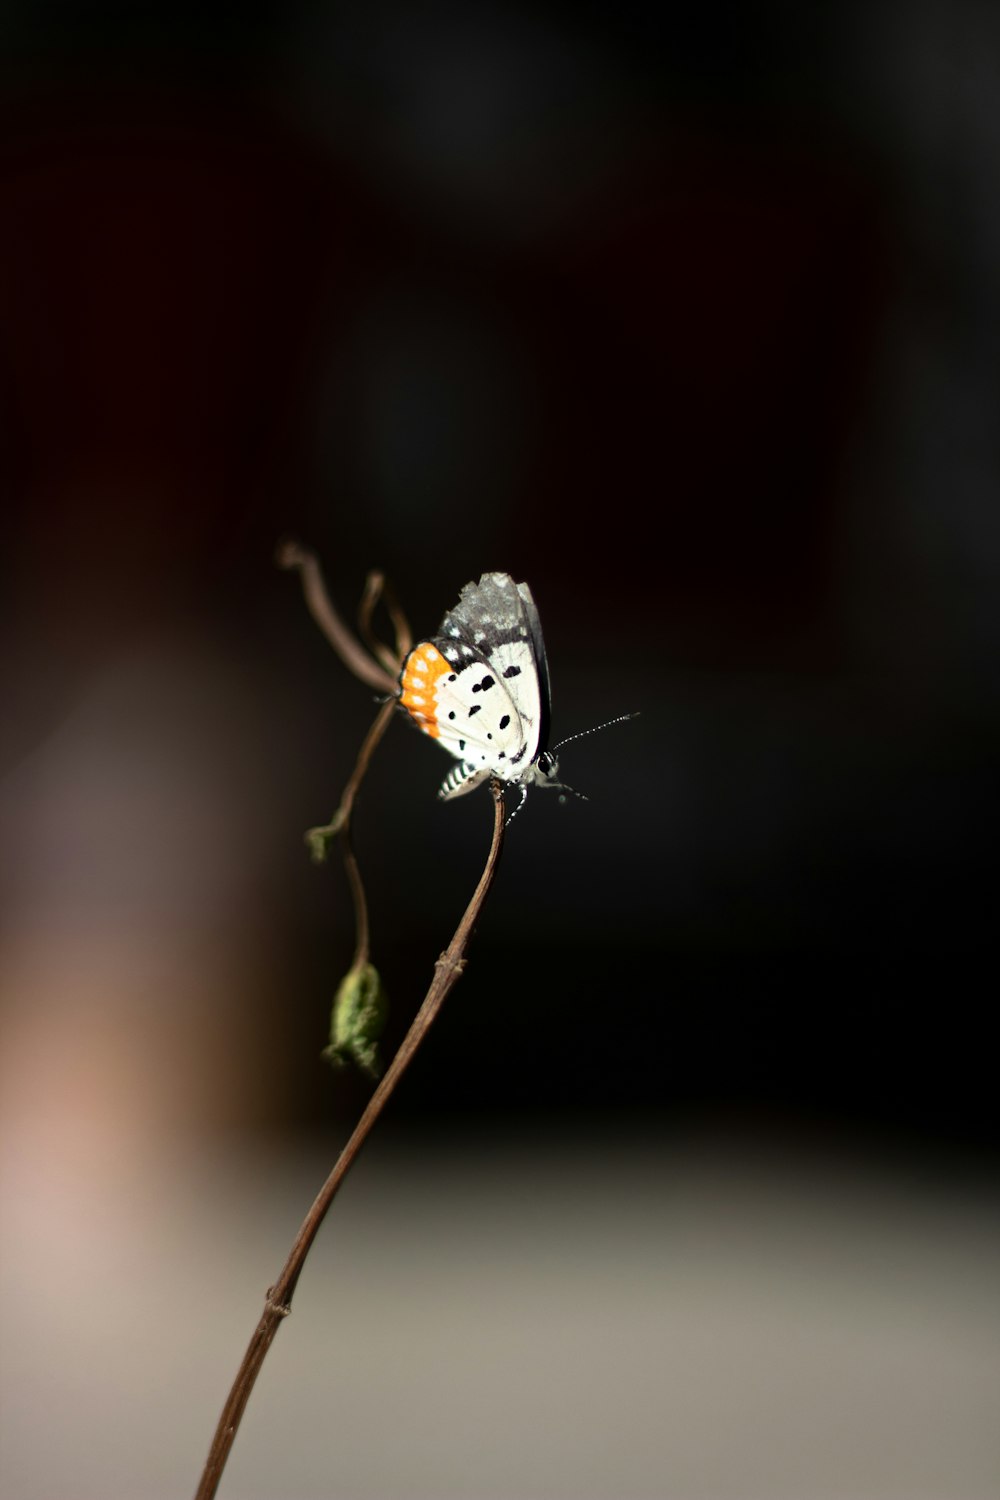 white and black butterfly perched on green plant